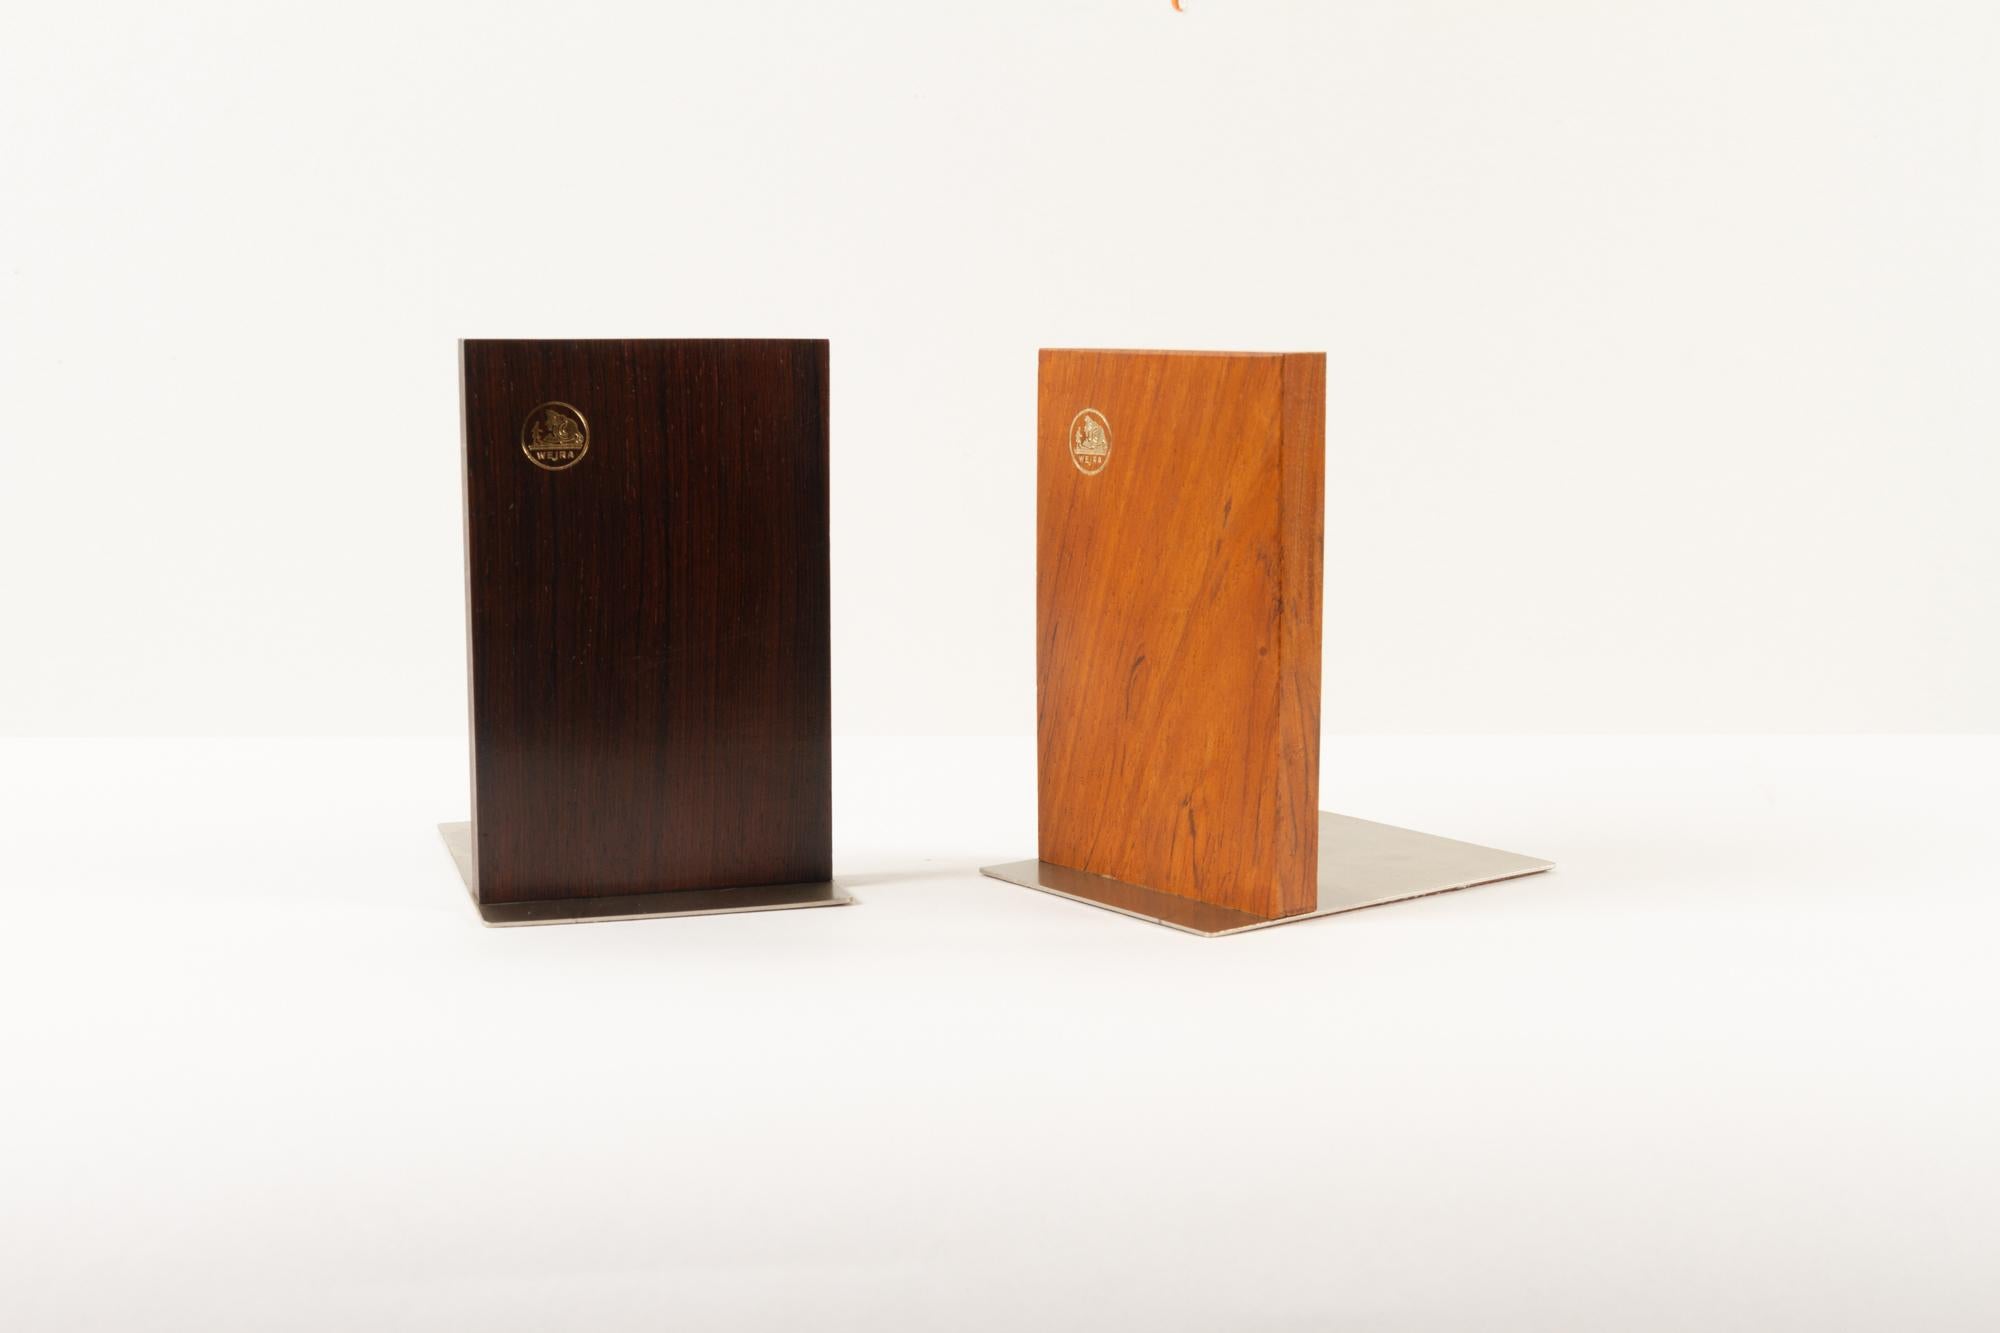 Mid-Century Modern Danish book ends 1960s set of 2.
Pair of solid hardwood book holders with metal feet.
Stamped with golden Wejra logo.
Cleaned and polished. Ready to support.
  